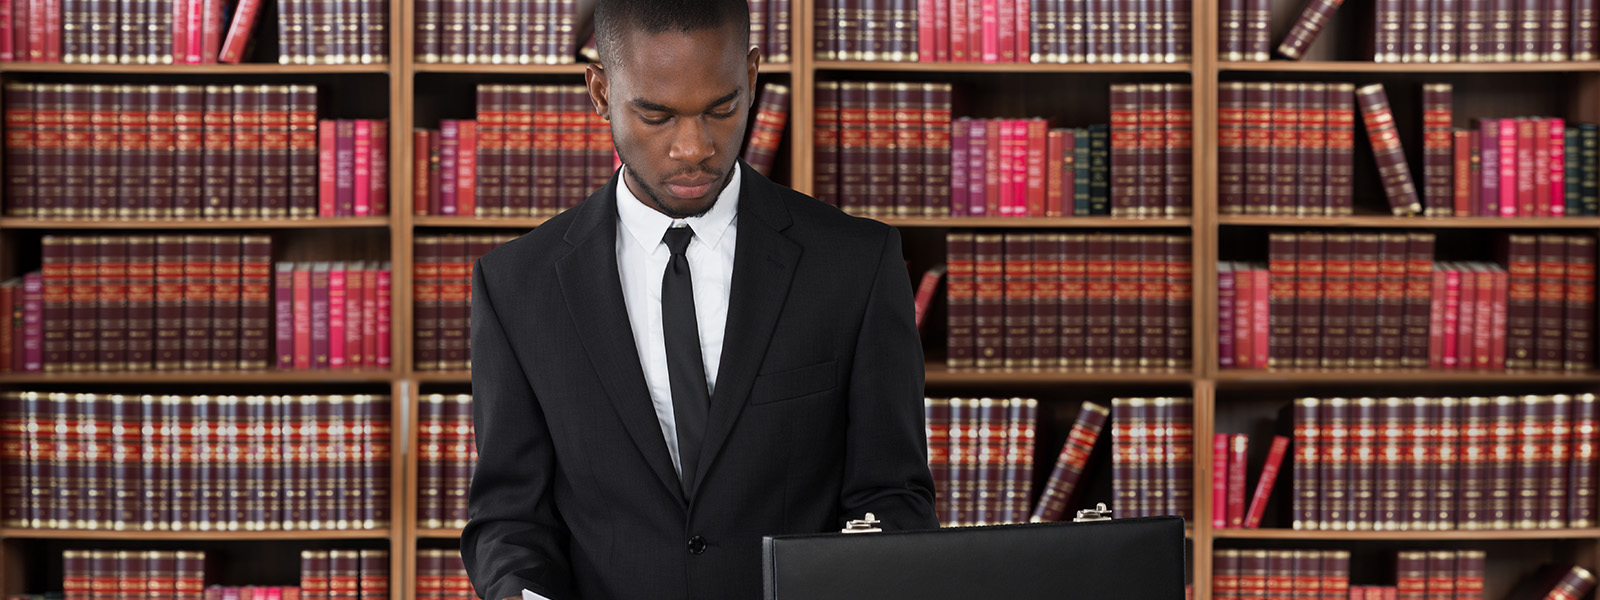 Young male lawyer in suit standing in library with shelves of law books behind him